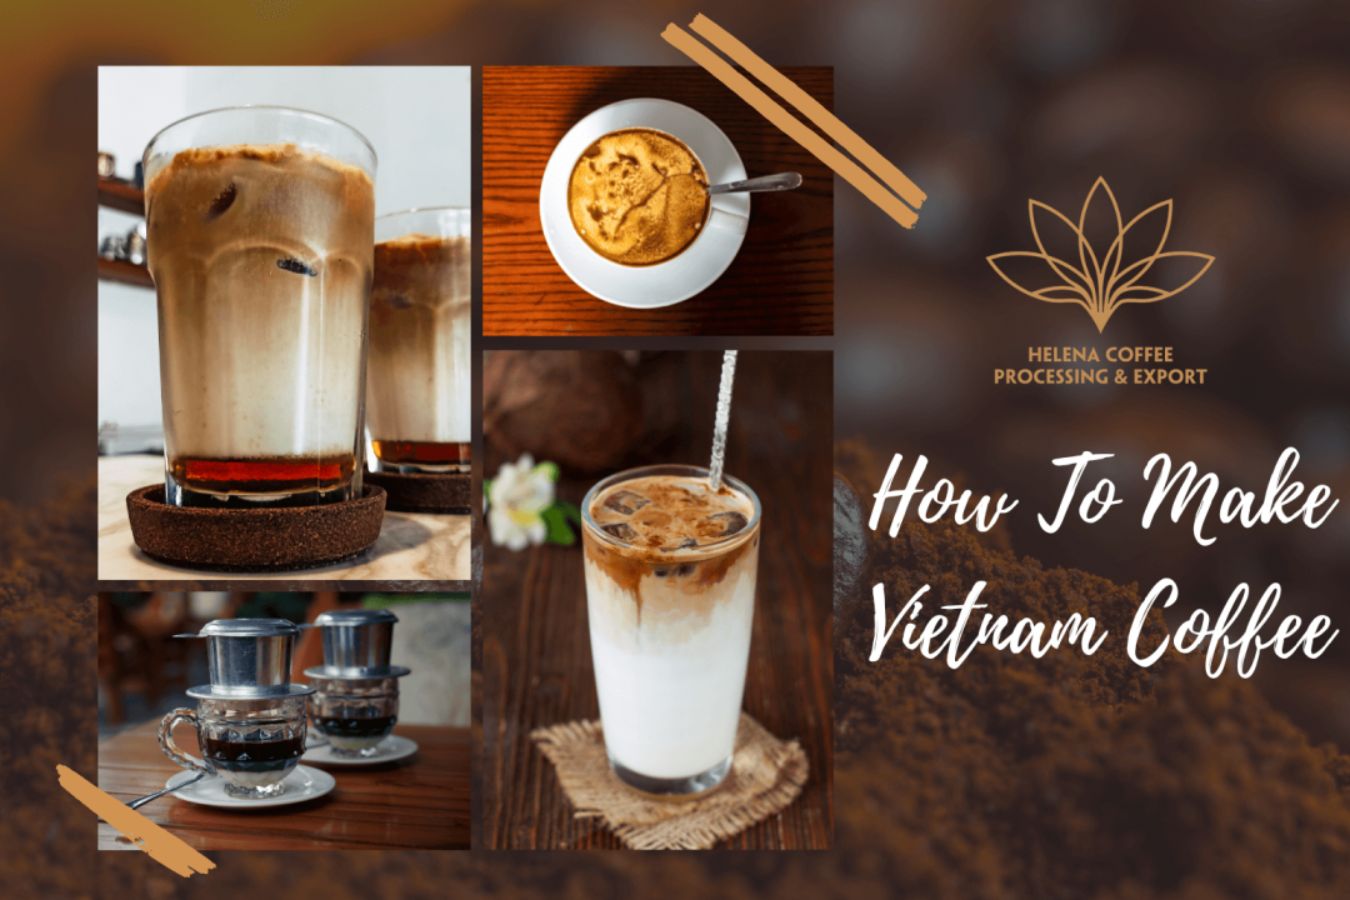 How To Make Vietnam Coffee: Coffee Can Be Made In 12 Different Ways